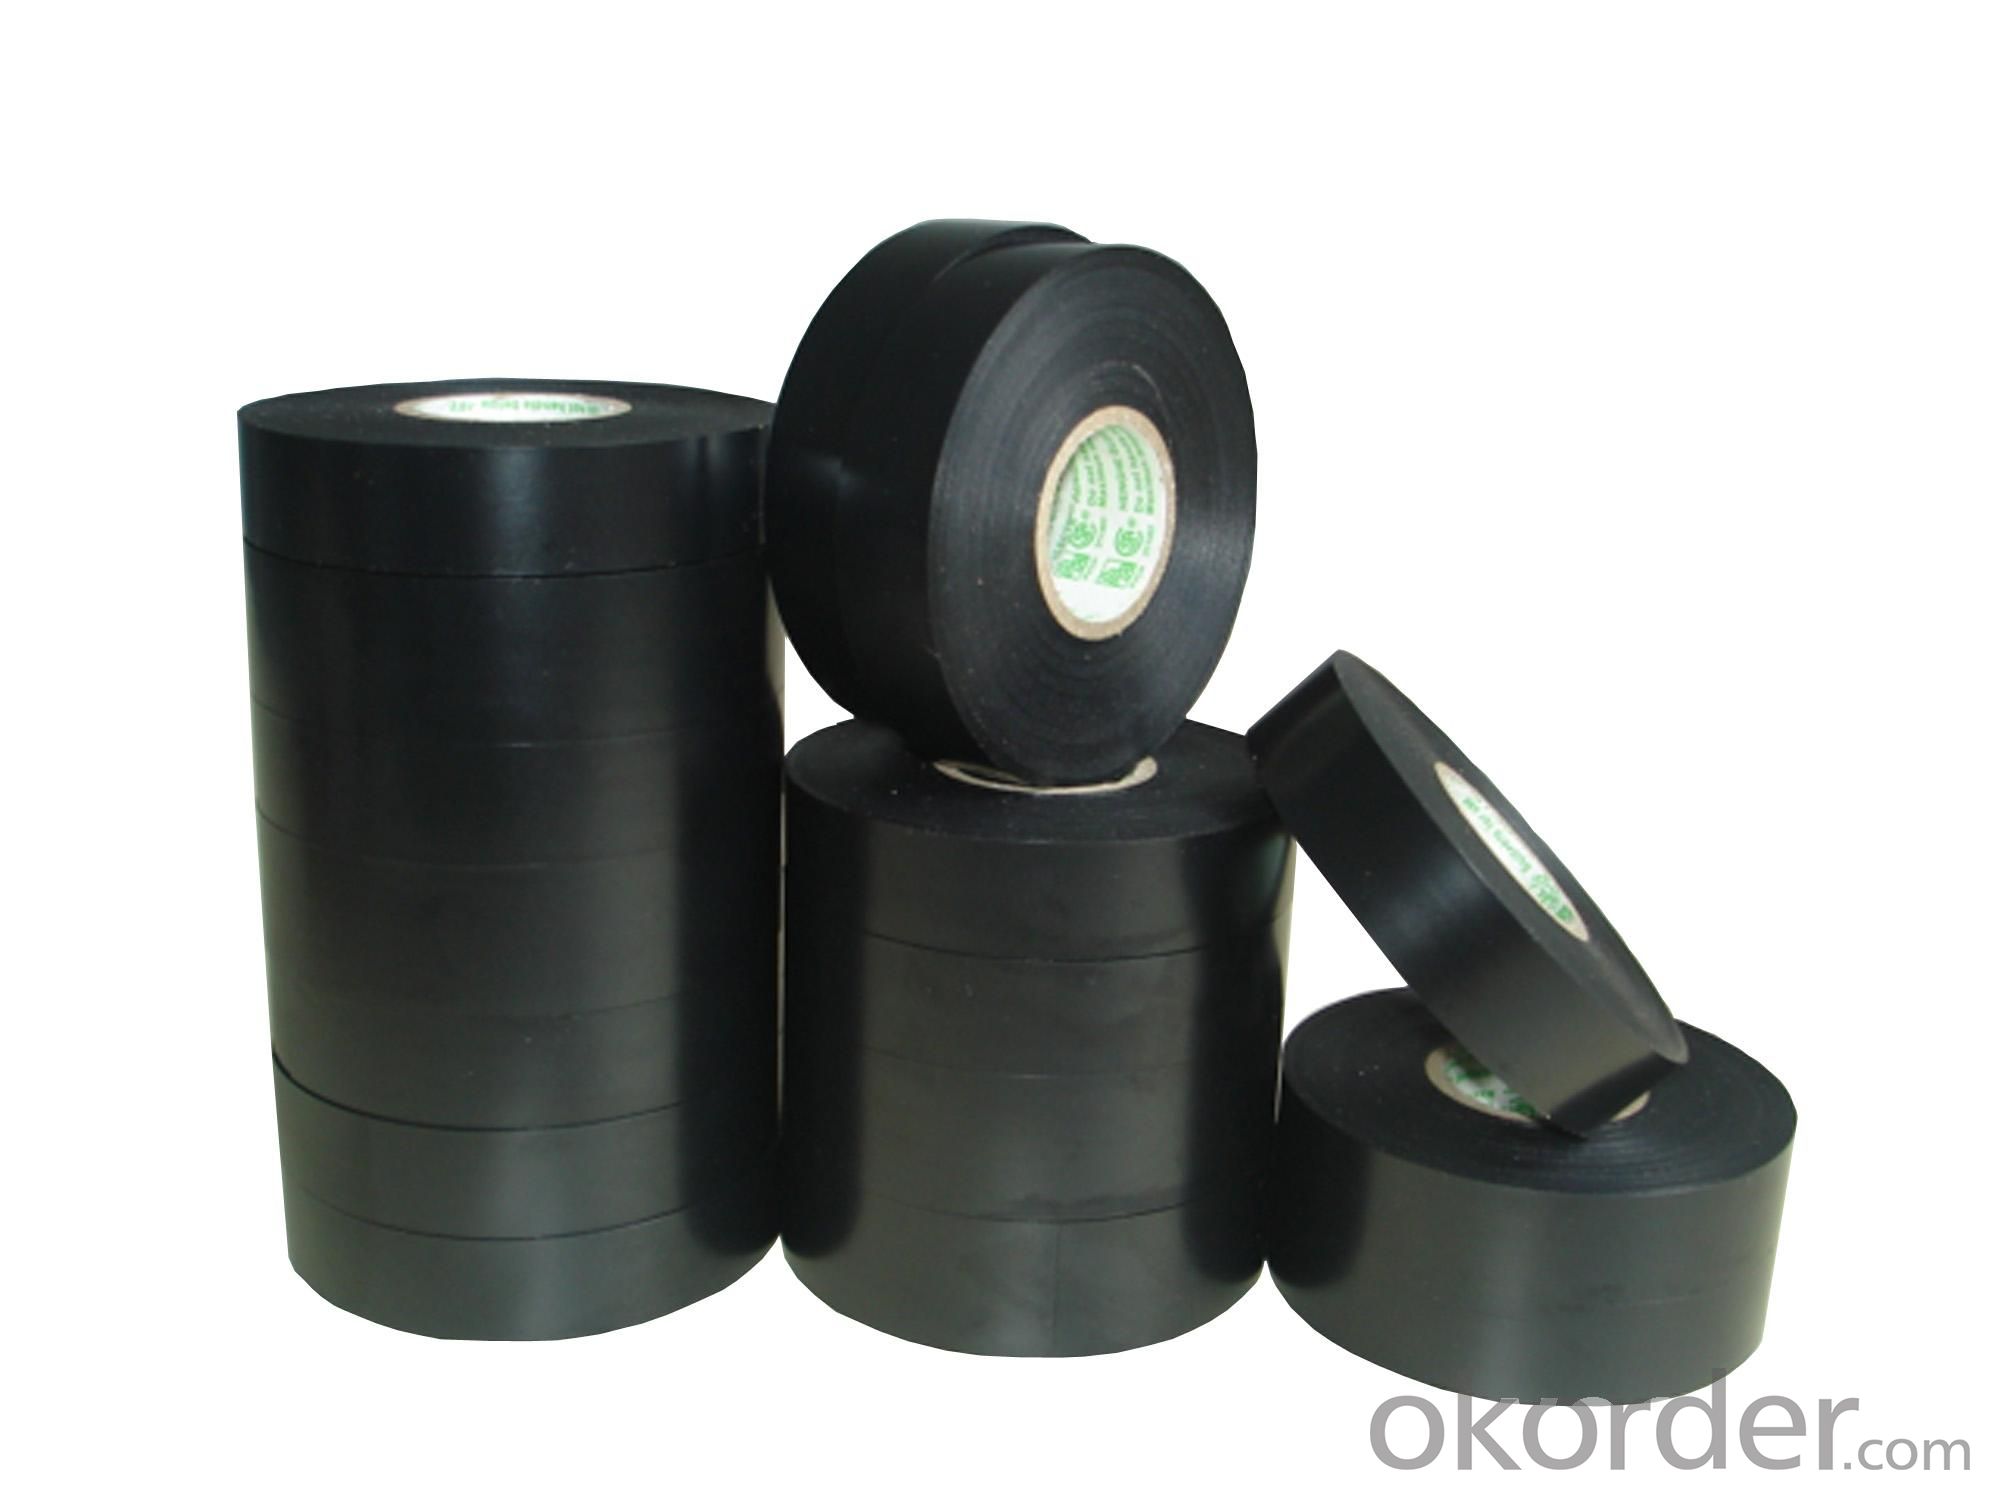 Garden Tie Tape for Binding Branch/Vine PVC/PE TIE TAPE Agriculture Tape of CNBM in China